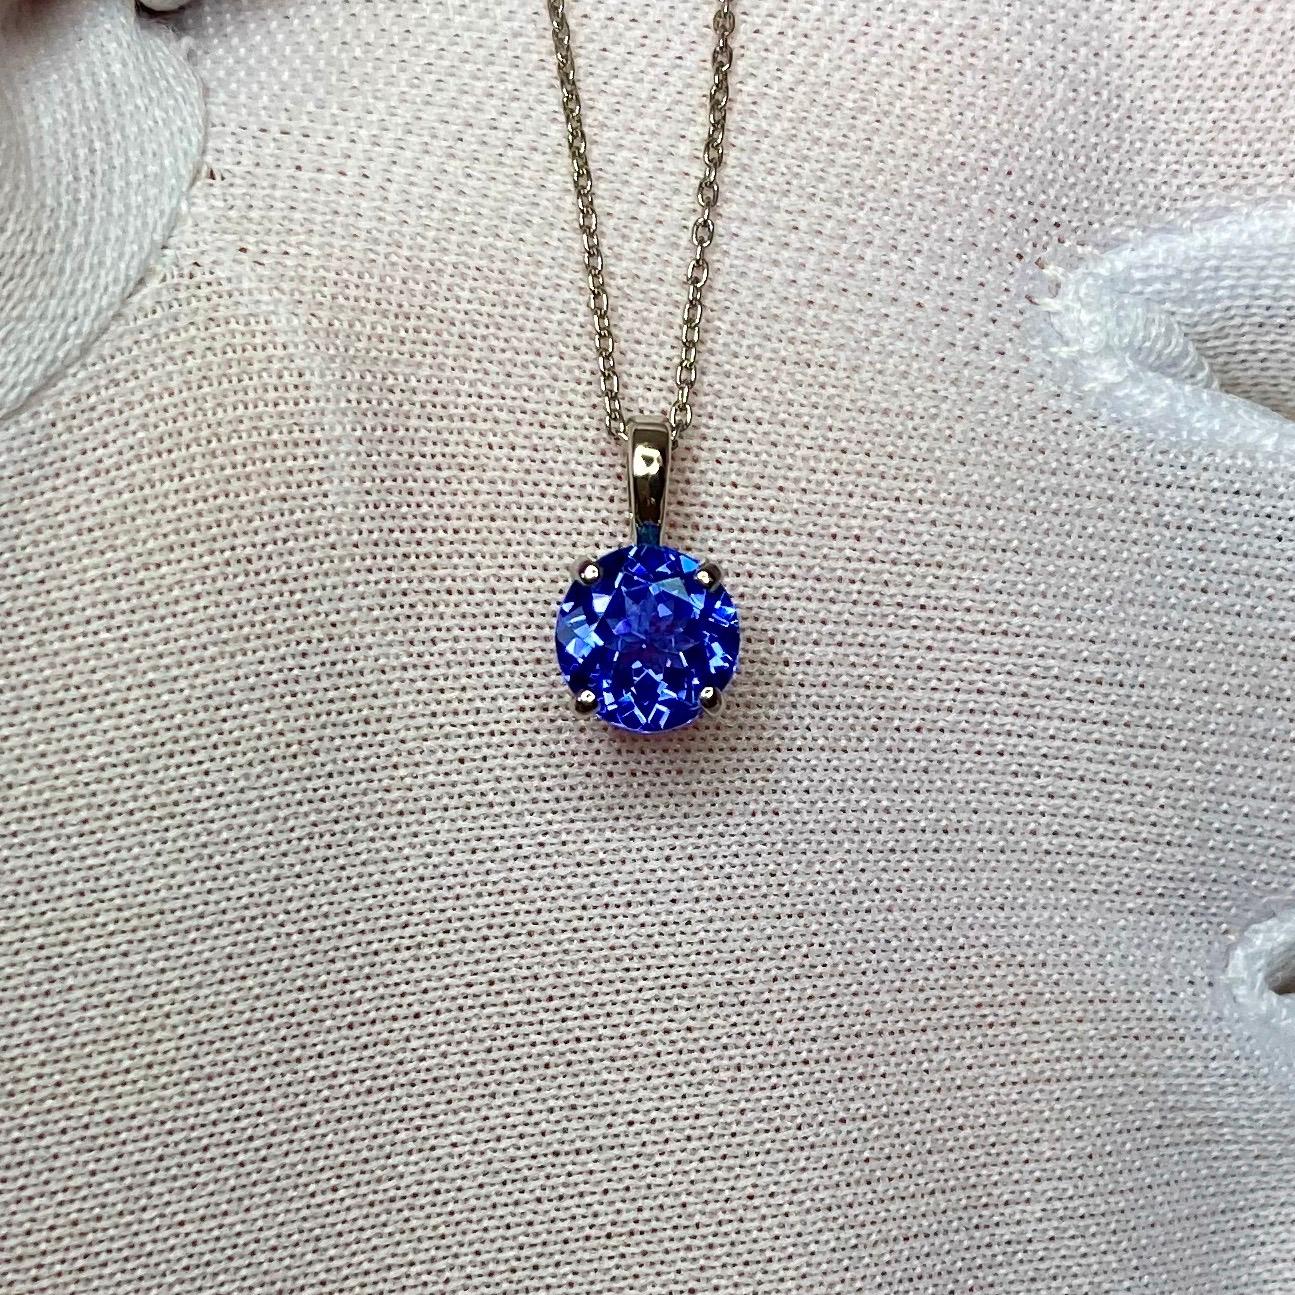 Stunning Vivid Blue Violet Natural Tanzanite Solitaire Pendant. 

1.00 carat stone with vivid blue violet colour and excellent clarity, very clean stone with only some small natural inclusions visible when looking closely. Set in a fine 950 Platinum